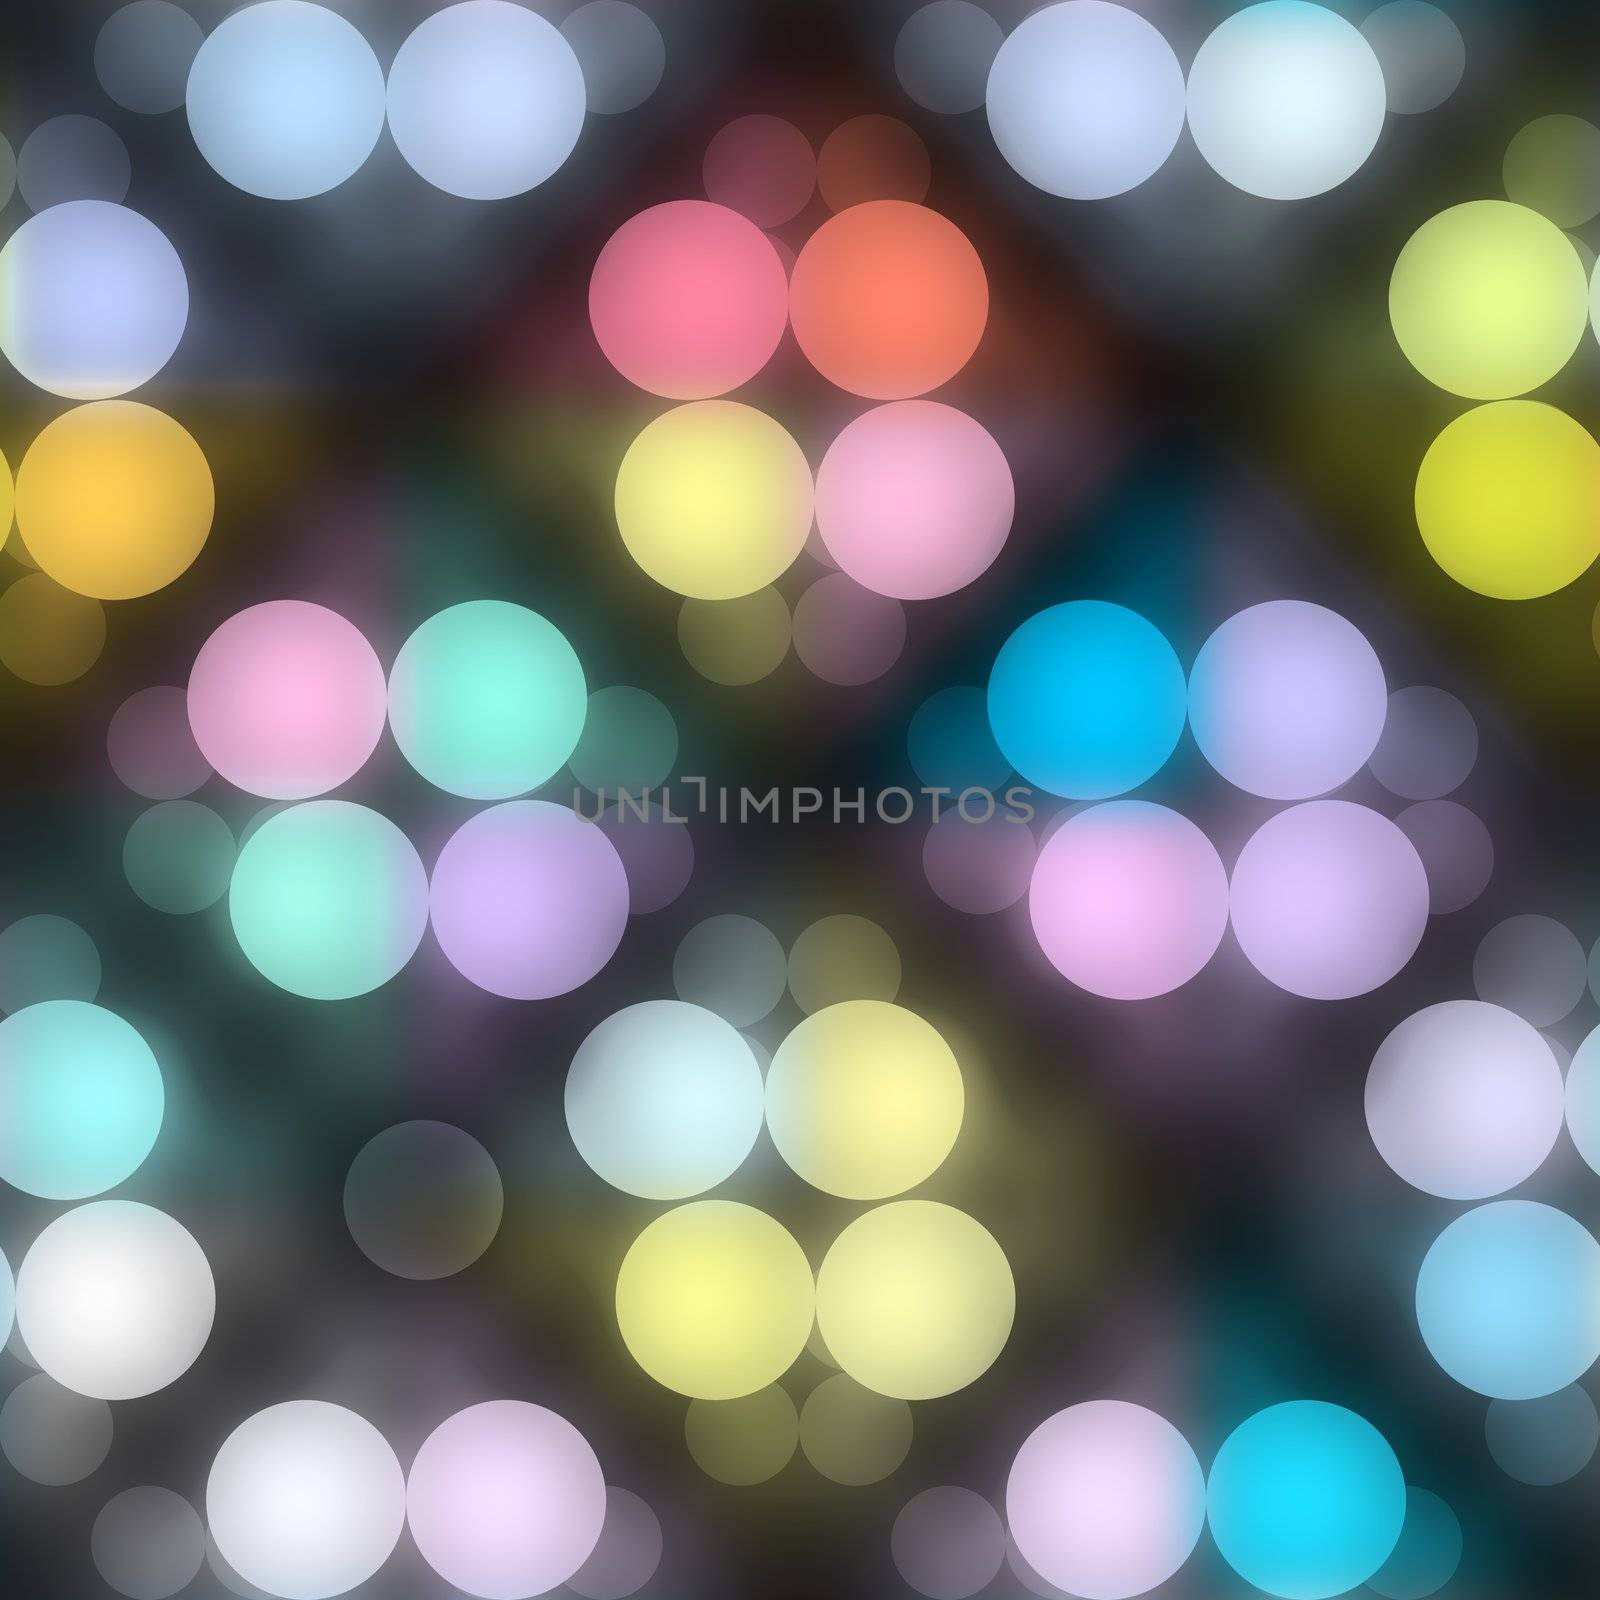 seamless texture of glowing colorful light dots